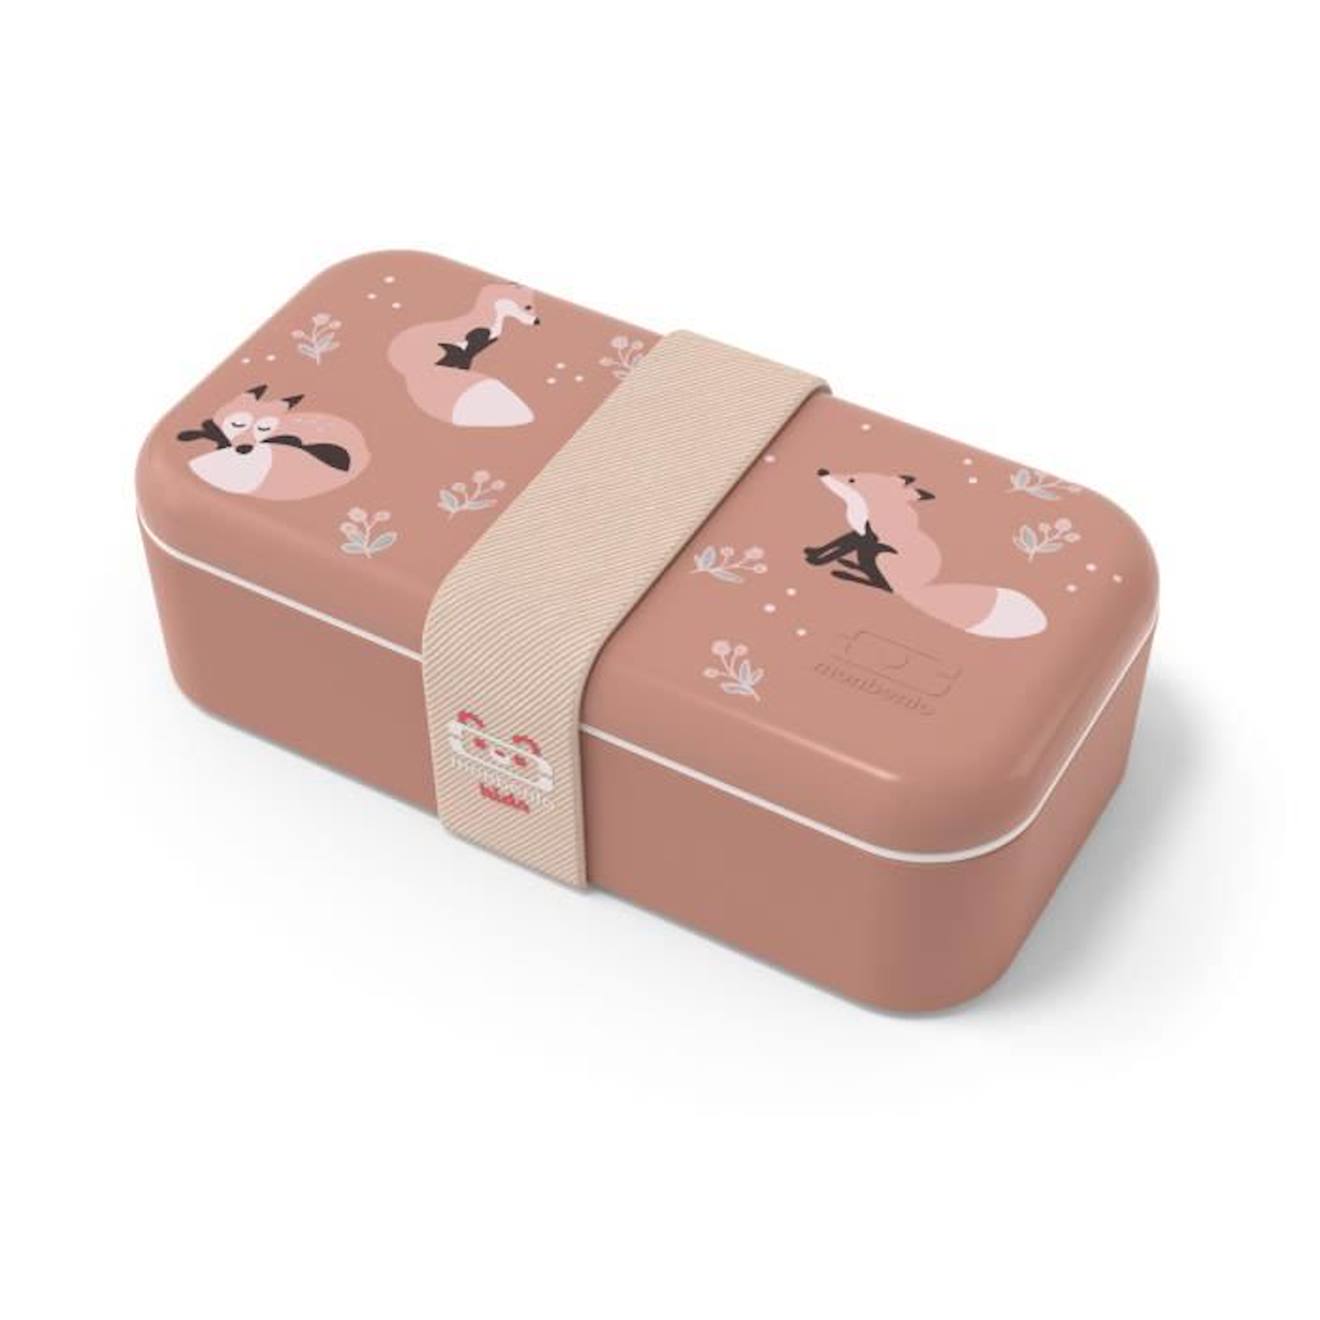 Bento Box Enfant - Lunch Box 1 Compartiment - Idéal Pour Travail/ecole - Made In France - Mb Foodie 